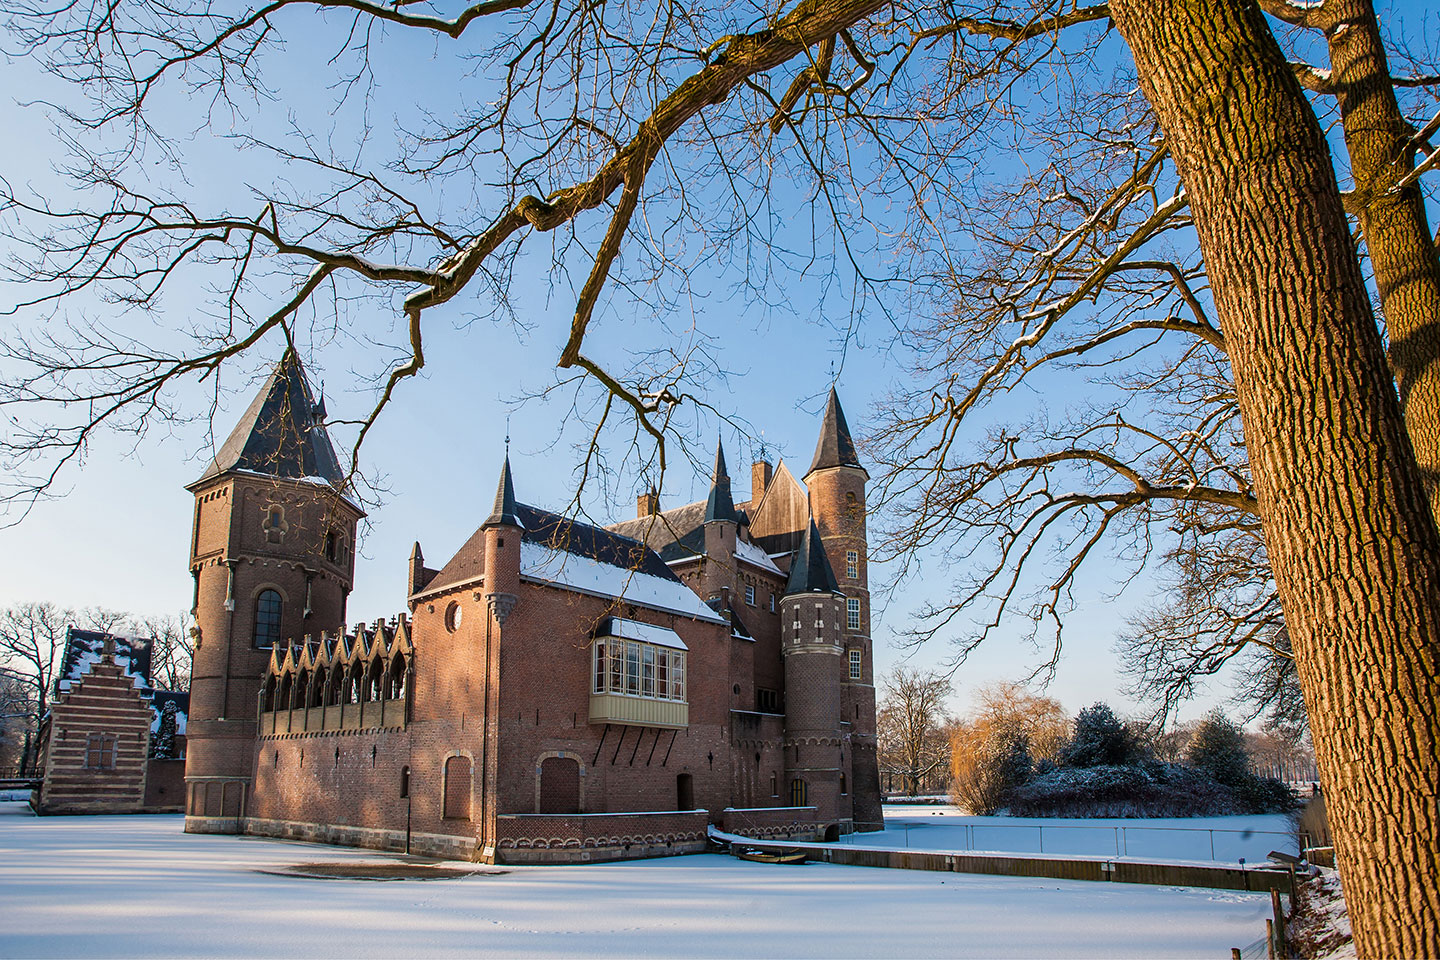 Travel photograhy of Heeswijk castle in the snow, the Netherlands